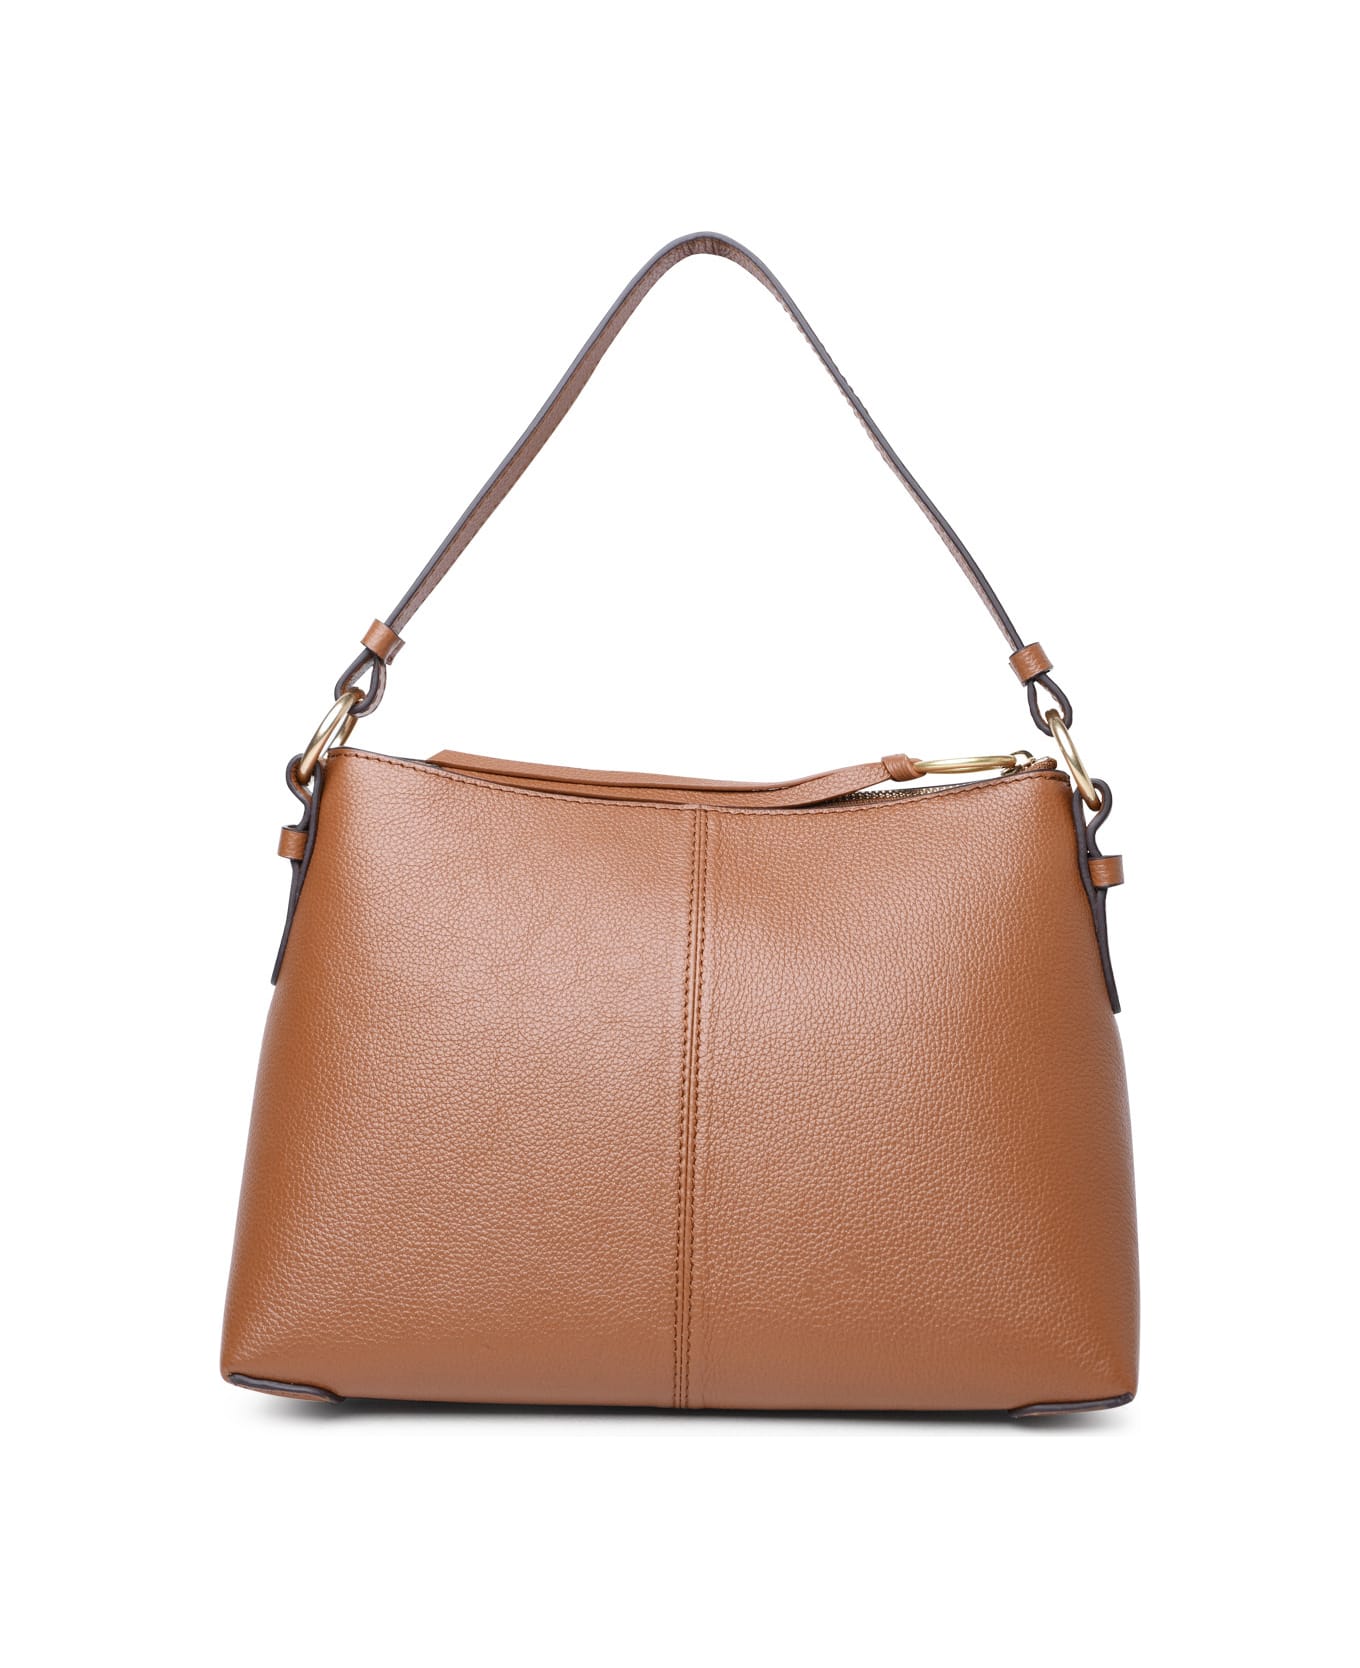 See by Chloé Small 'joan' Caramel Leather Bag - Brown トートバッグ